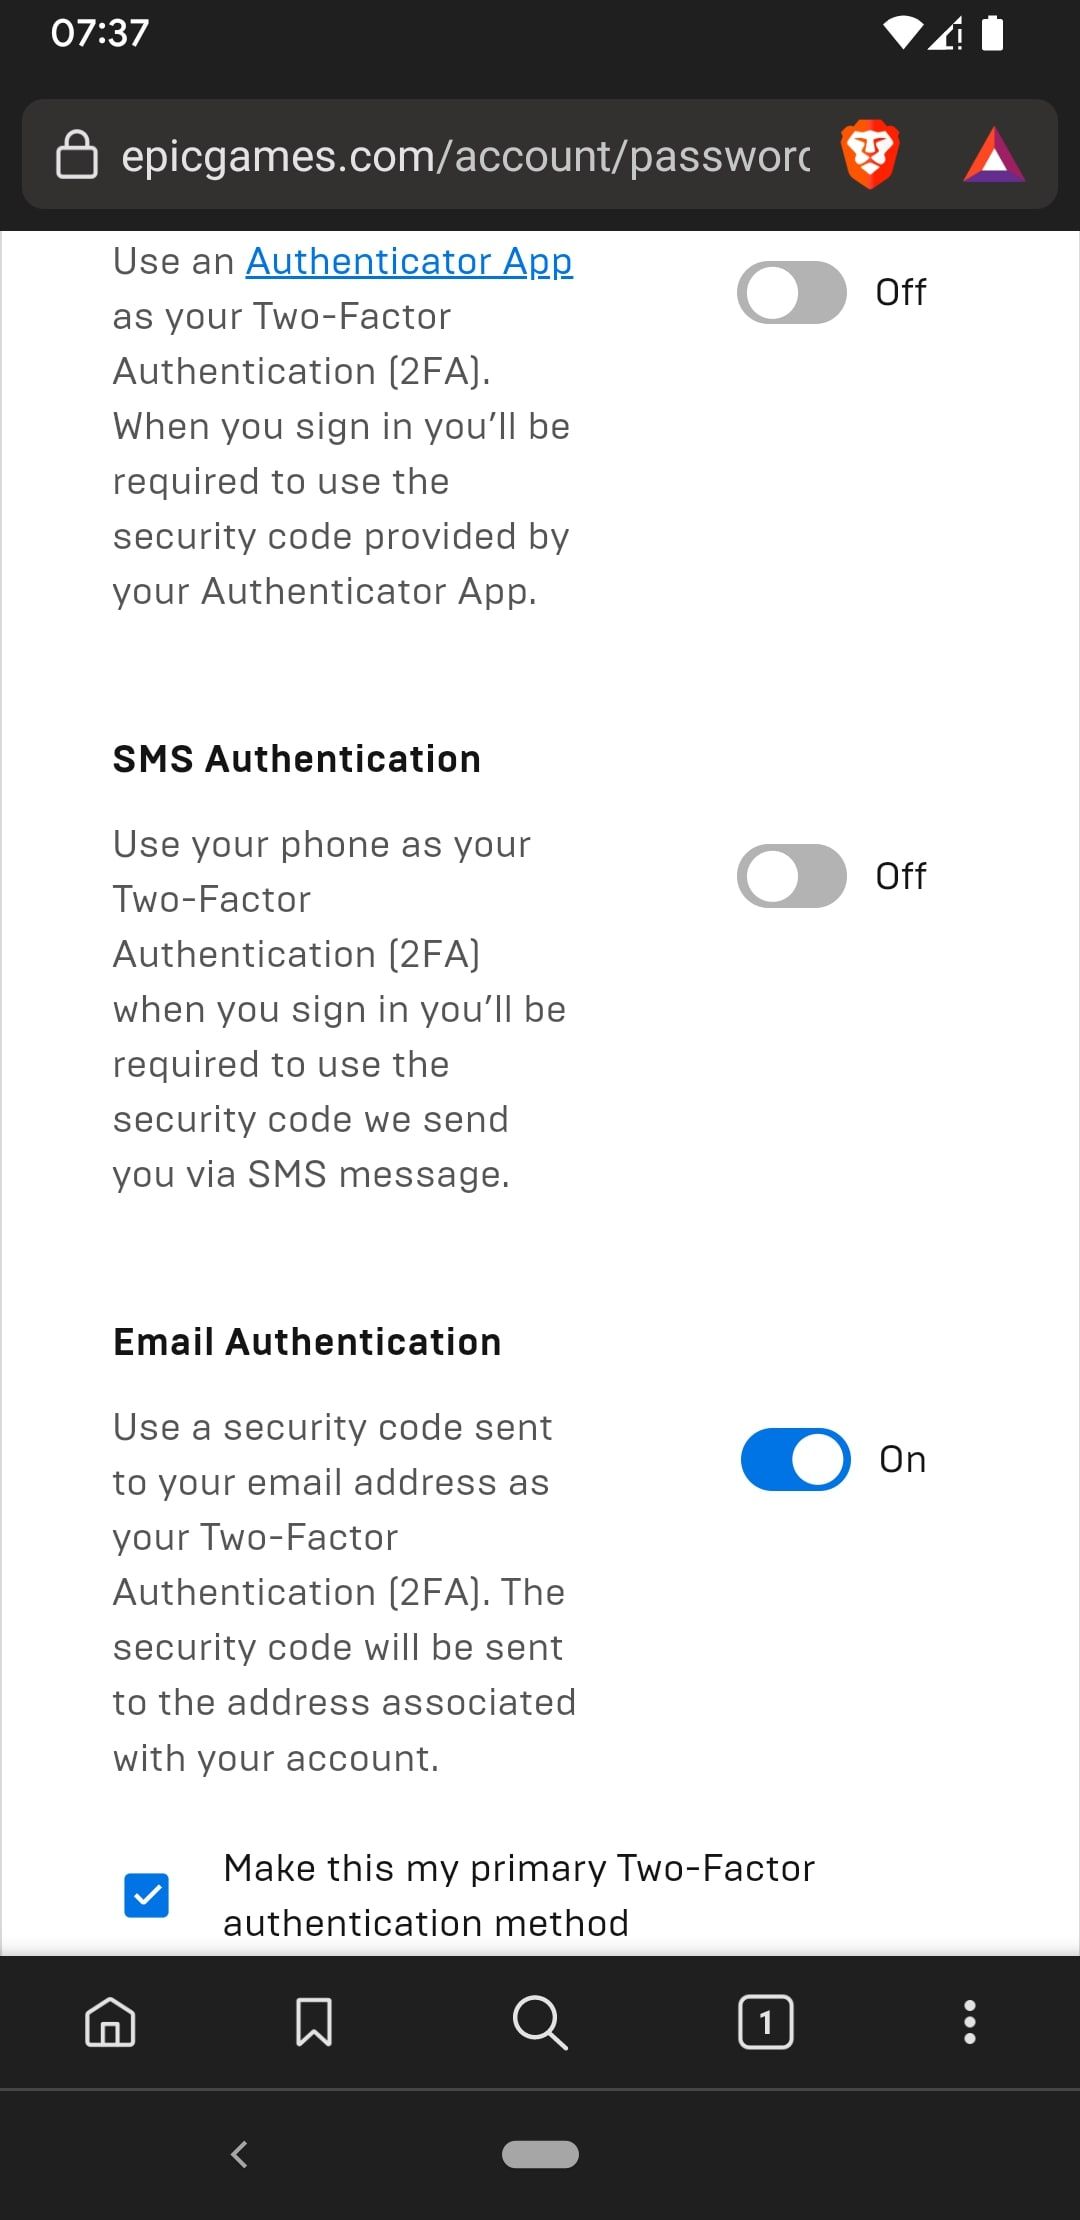 how-to-set-up-2fa-in-fortnite-epic-games-account-settings-make-this-my-primary-two-factor-authentication-method